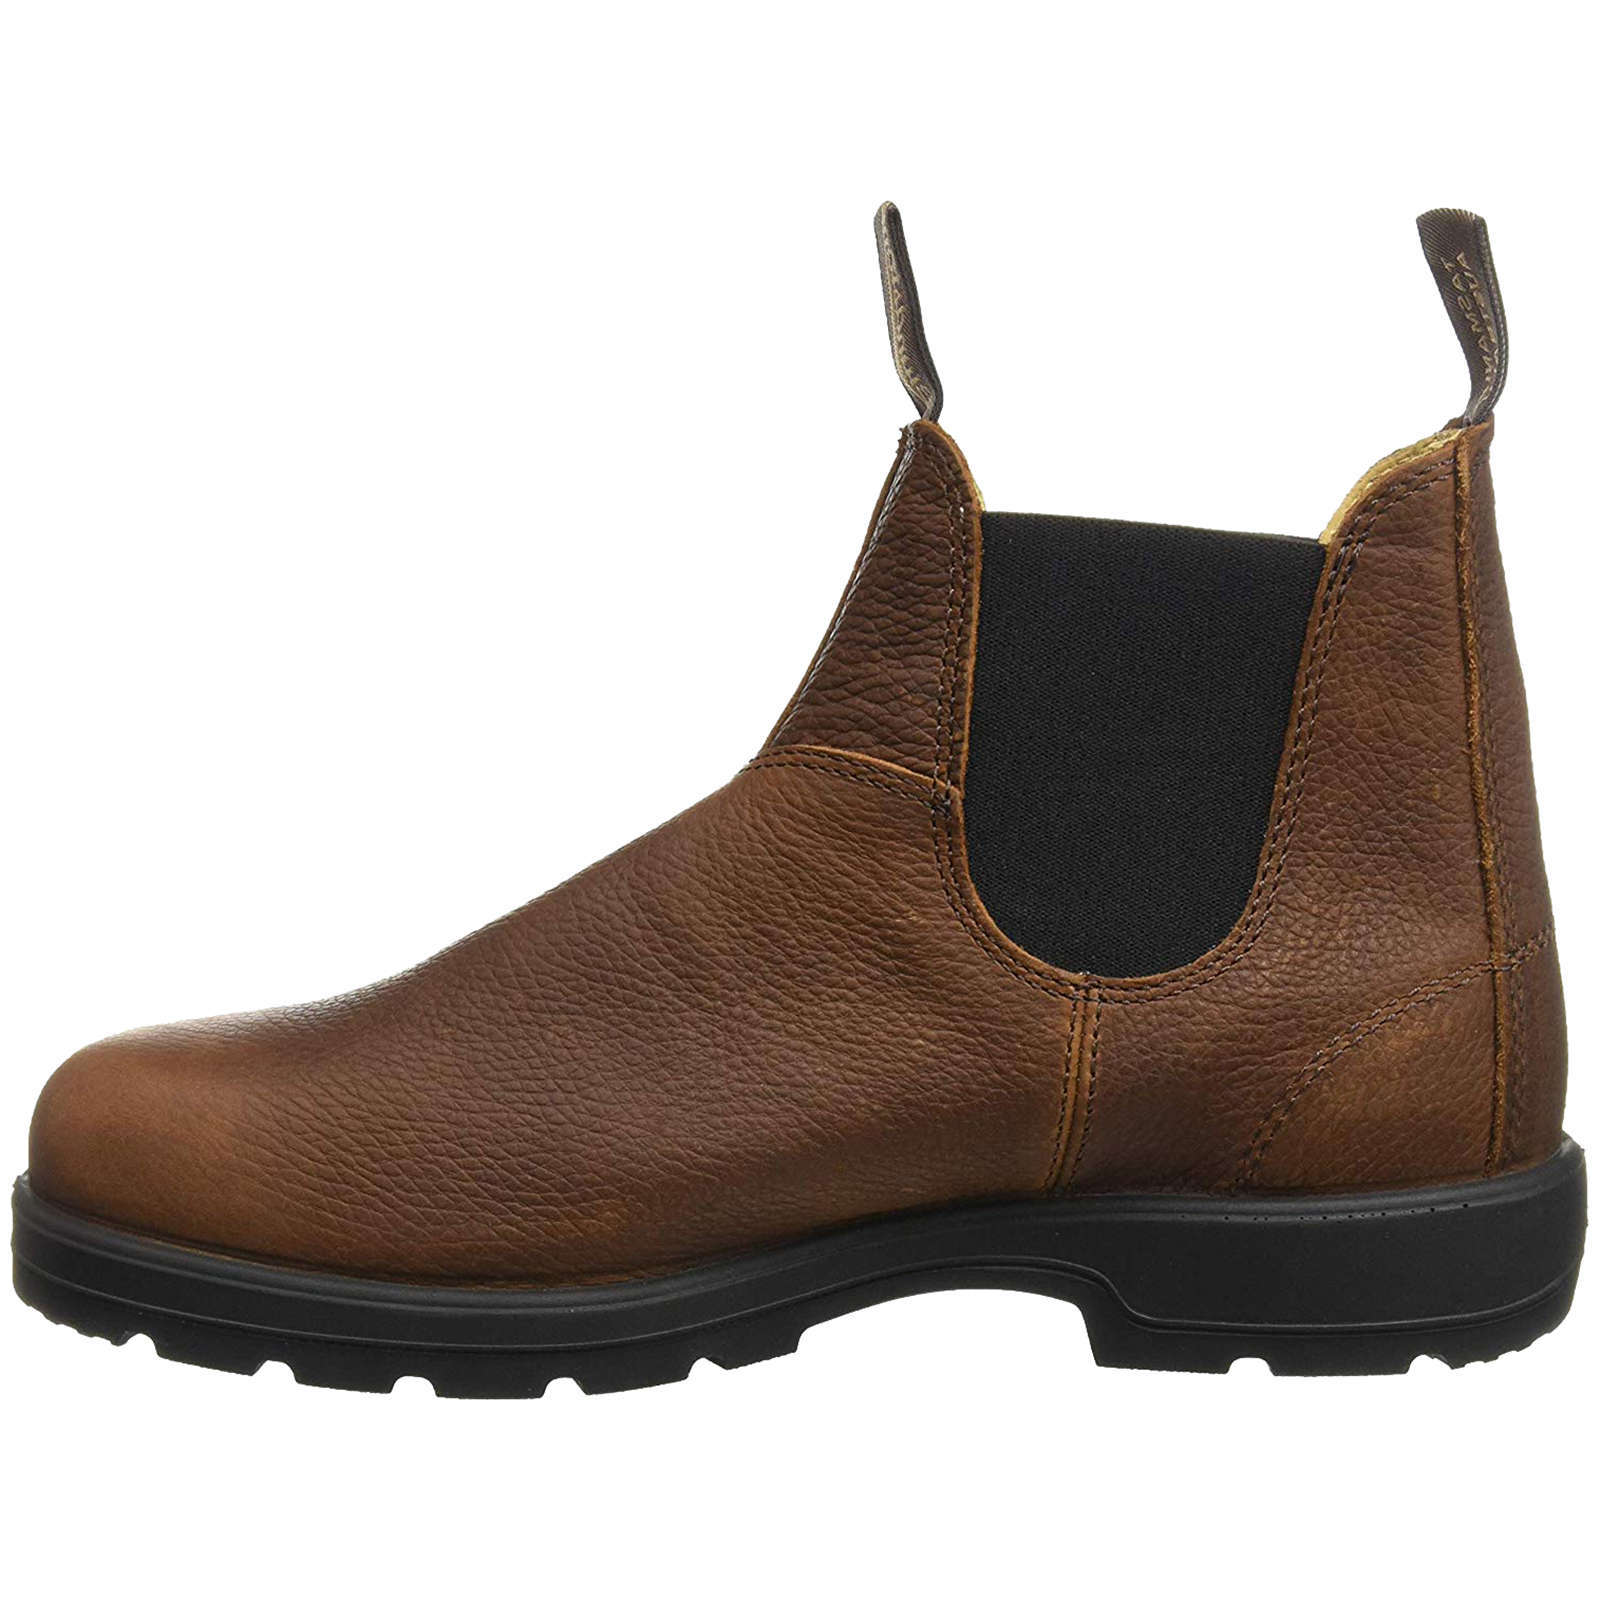 Blundstone 1445 Water-Resistant Leather Unisex Chelsea Boots#color_brown pebble